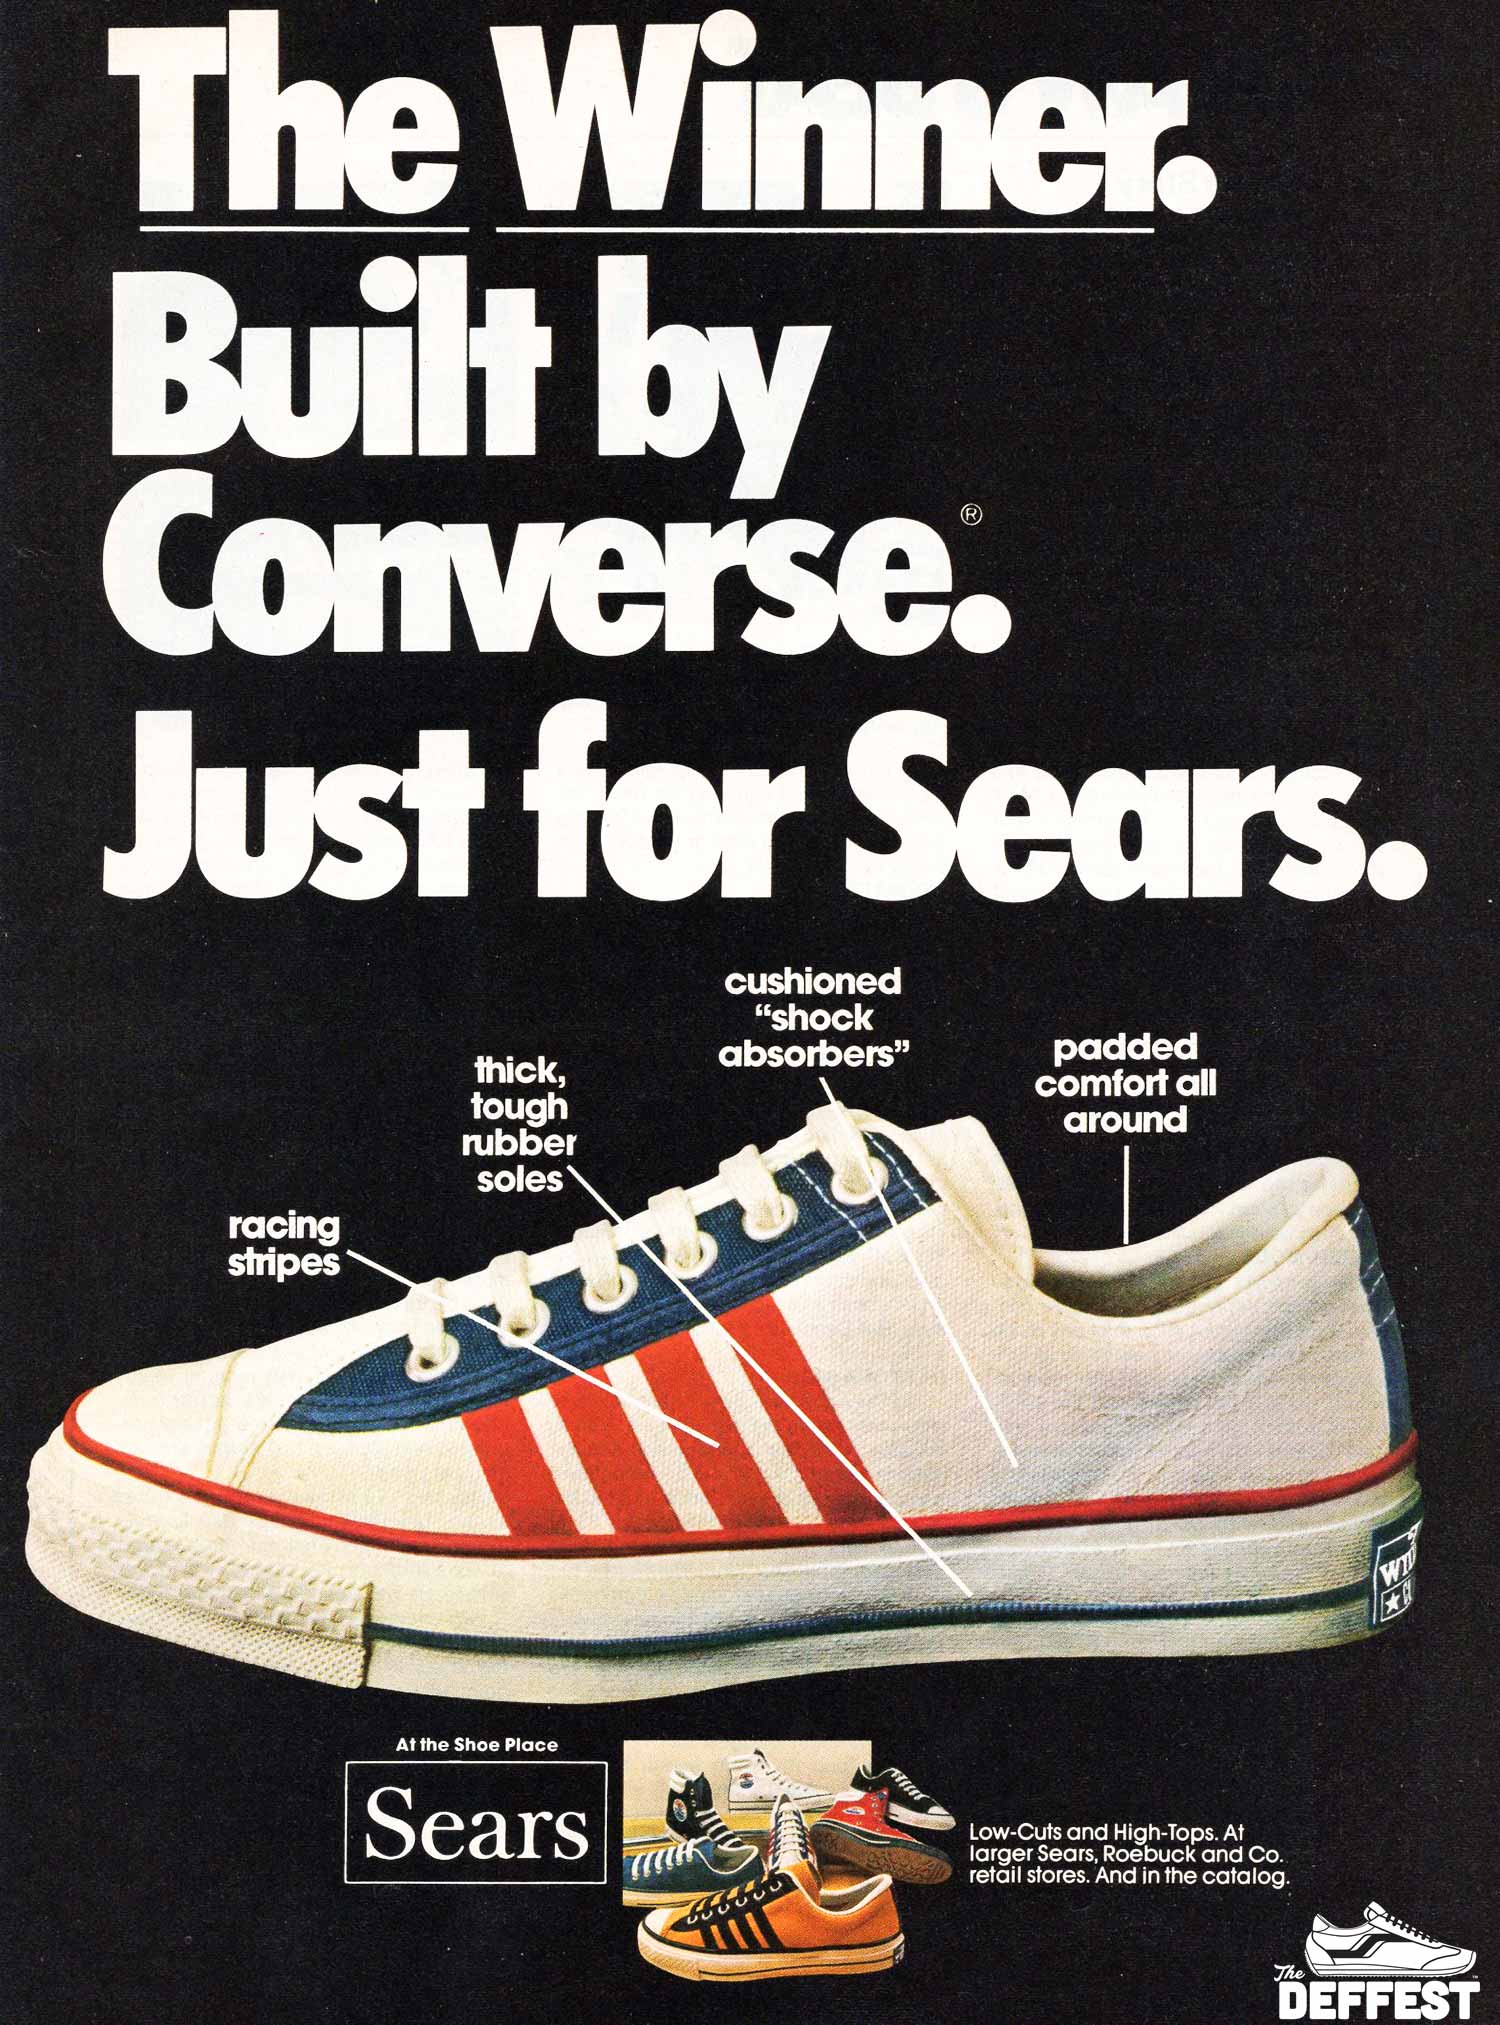 The Deffest®. A vintage and retro sneaker blog. — Sears The Winner 1974  vintage sneaker ad